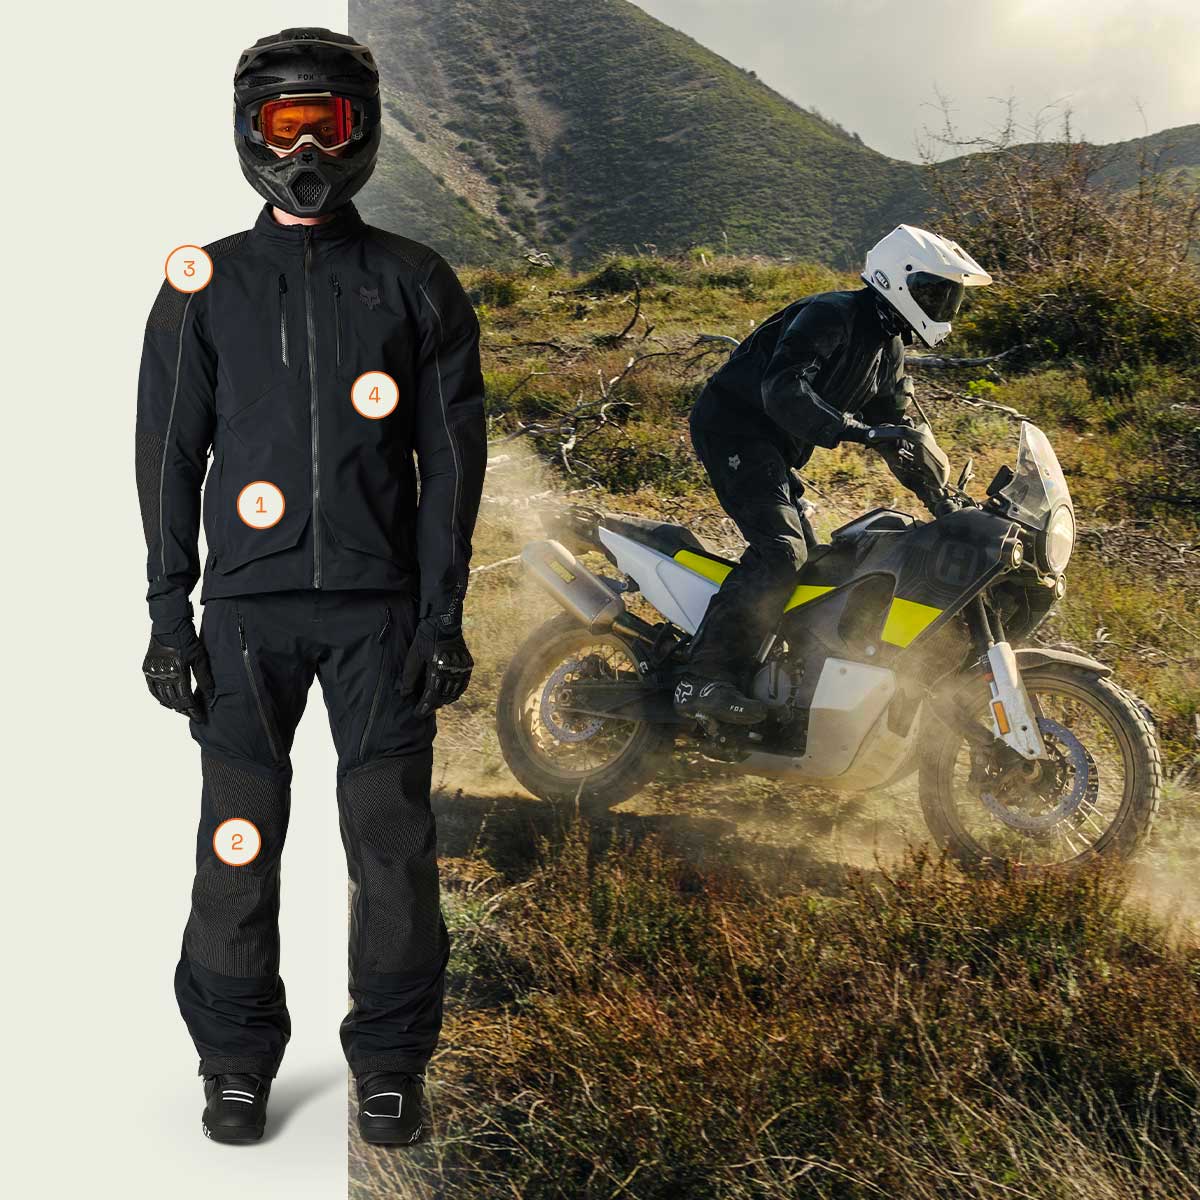 A side-by-side featuring a model wearing the Recon adventure suit from head to toe, alongside an the same model riding on a trail.